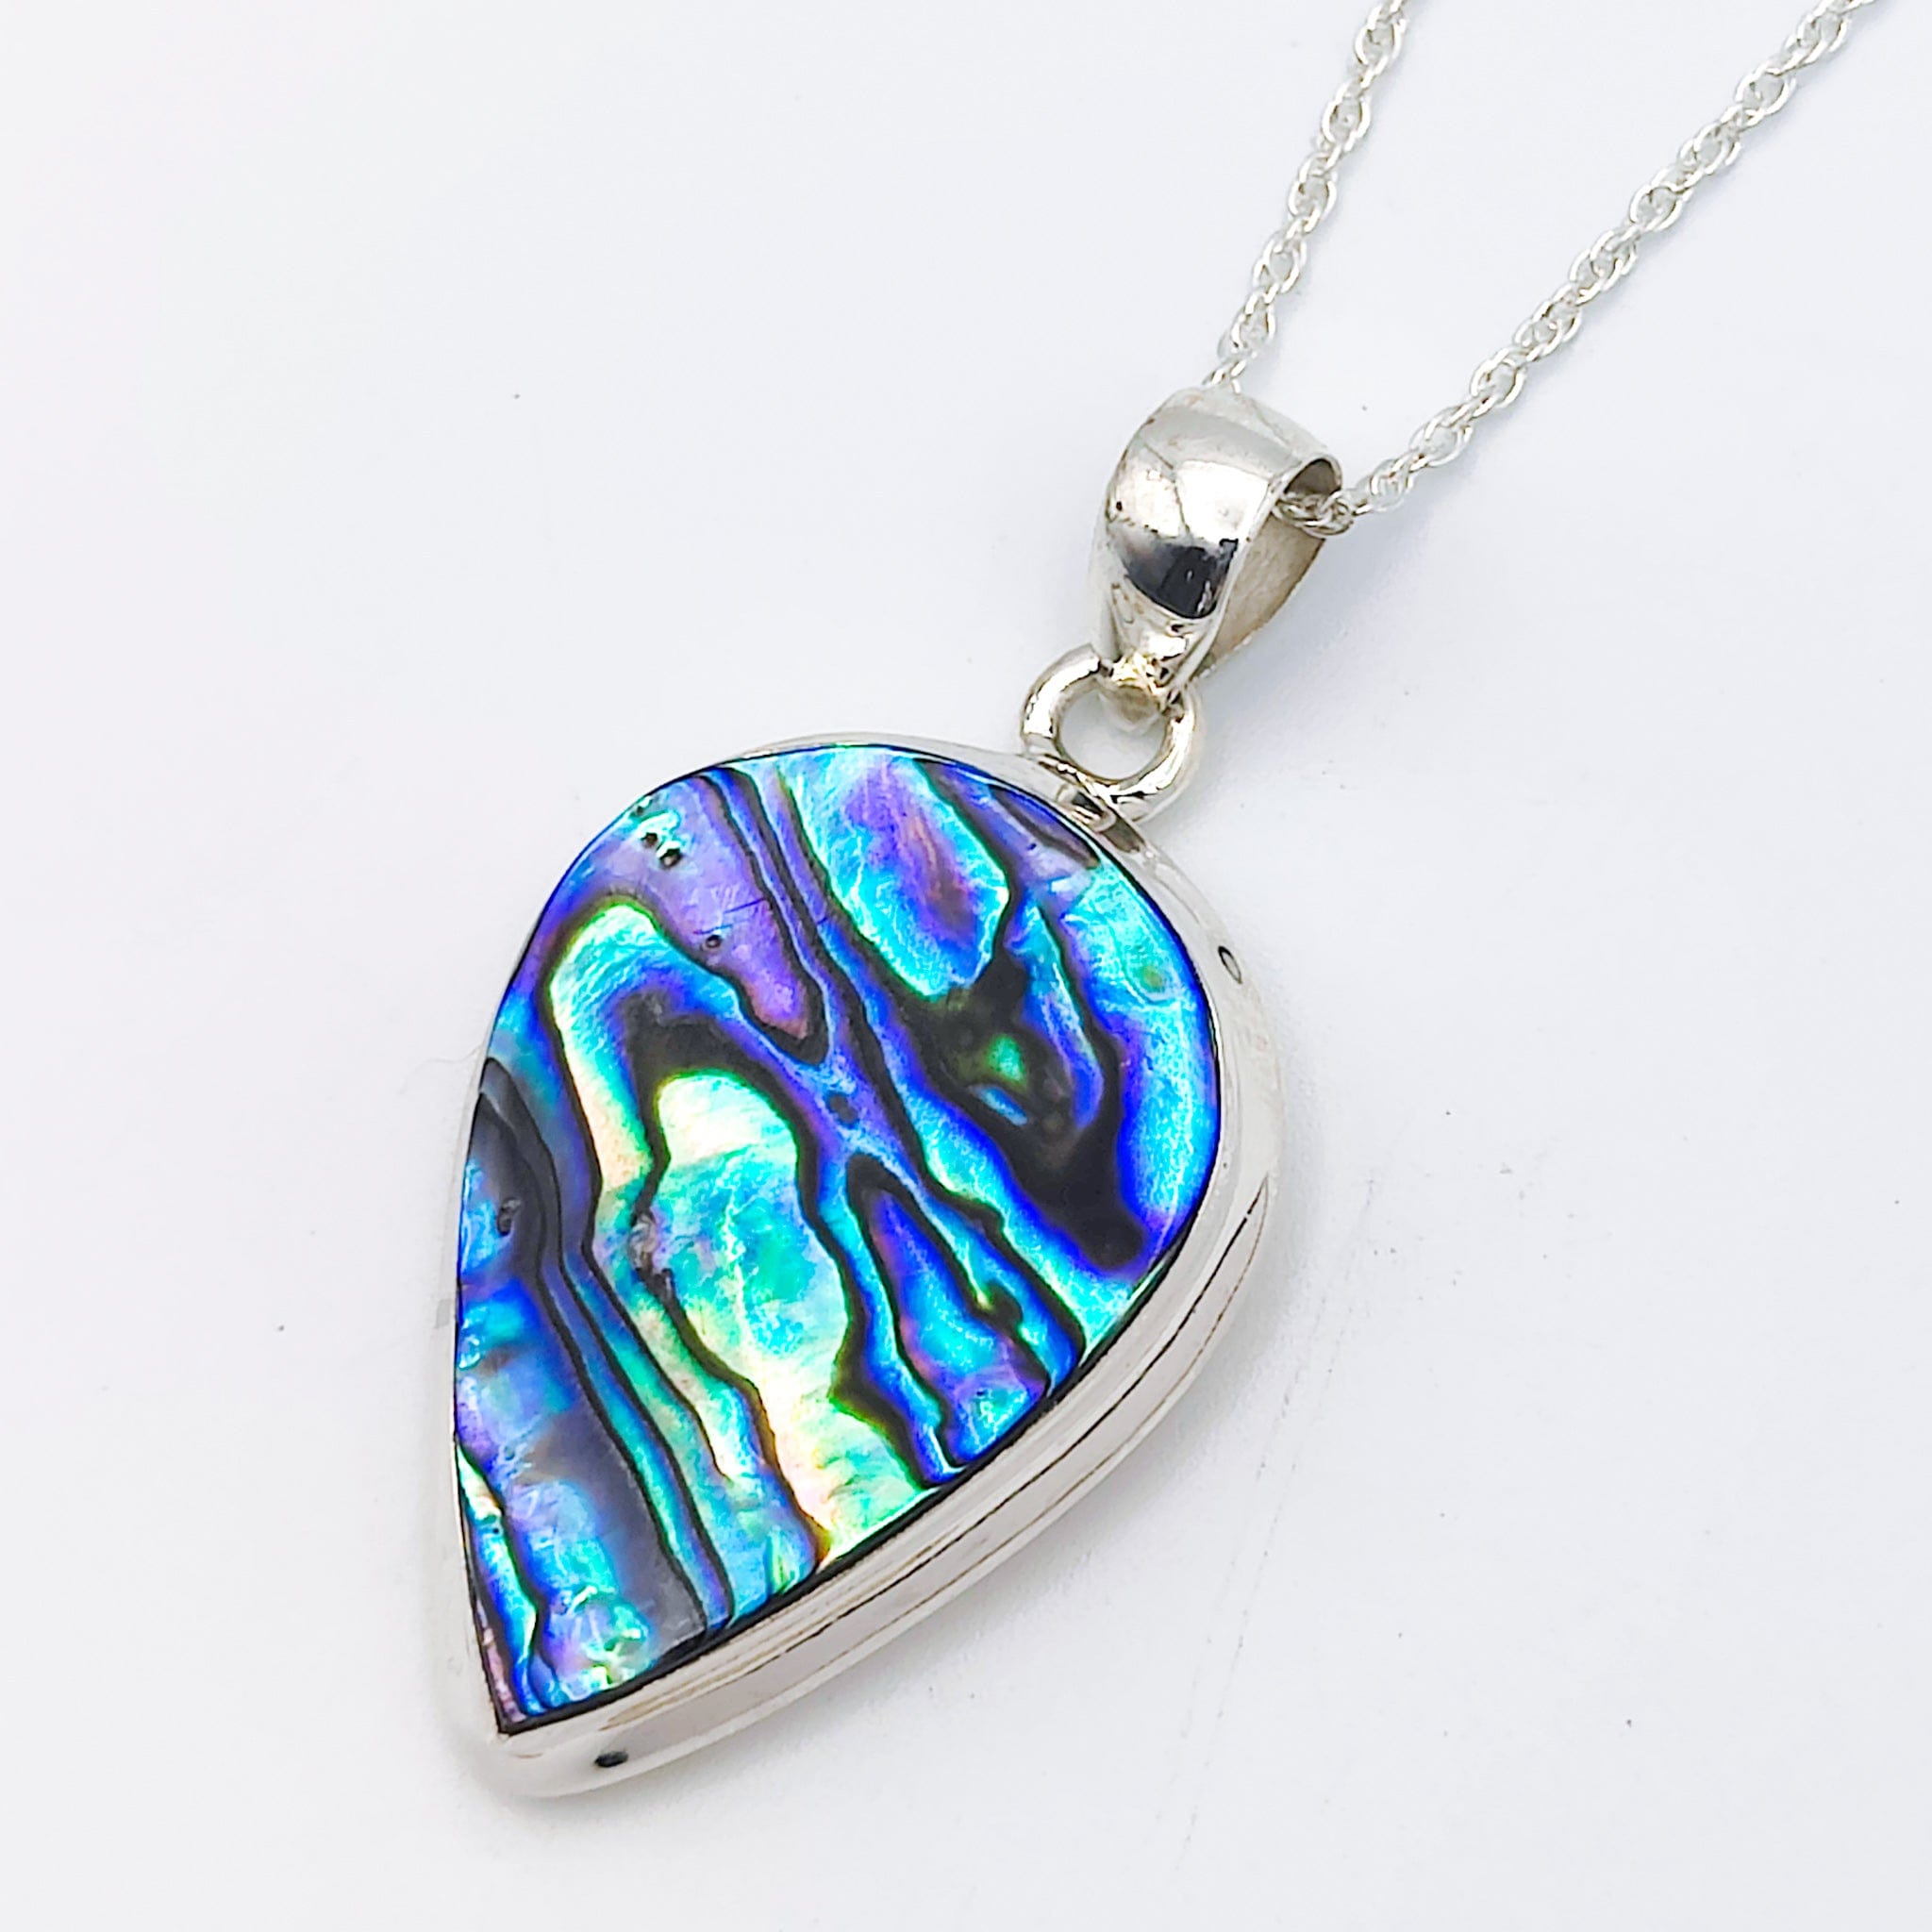 Hepburn and Hughes Abalone Sea Shell Pendant | 35mm Pear | Sterling Silver